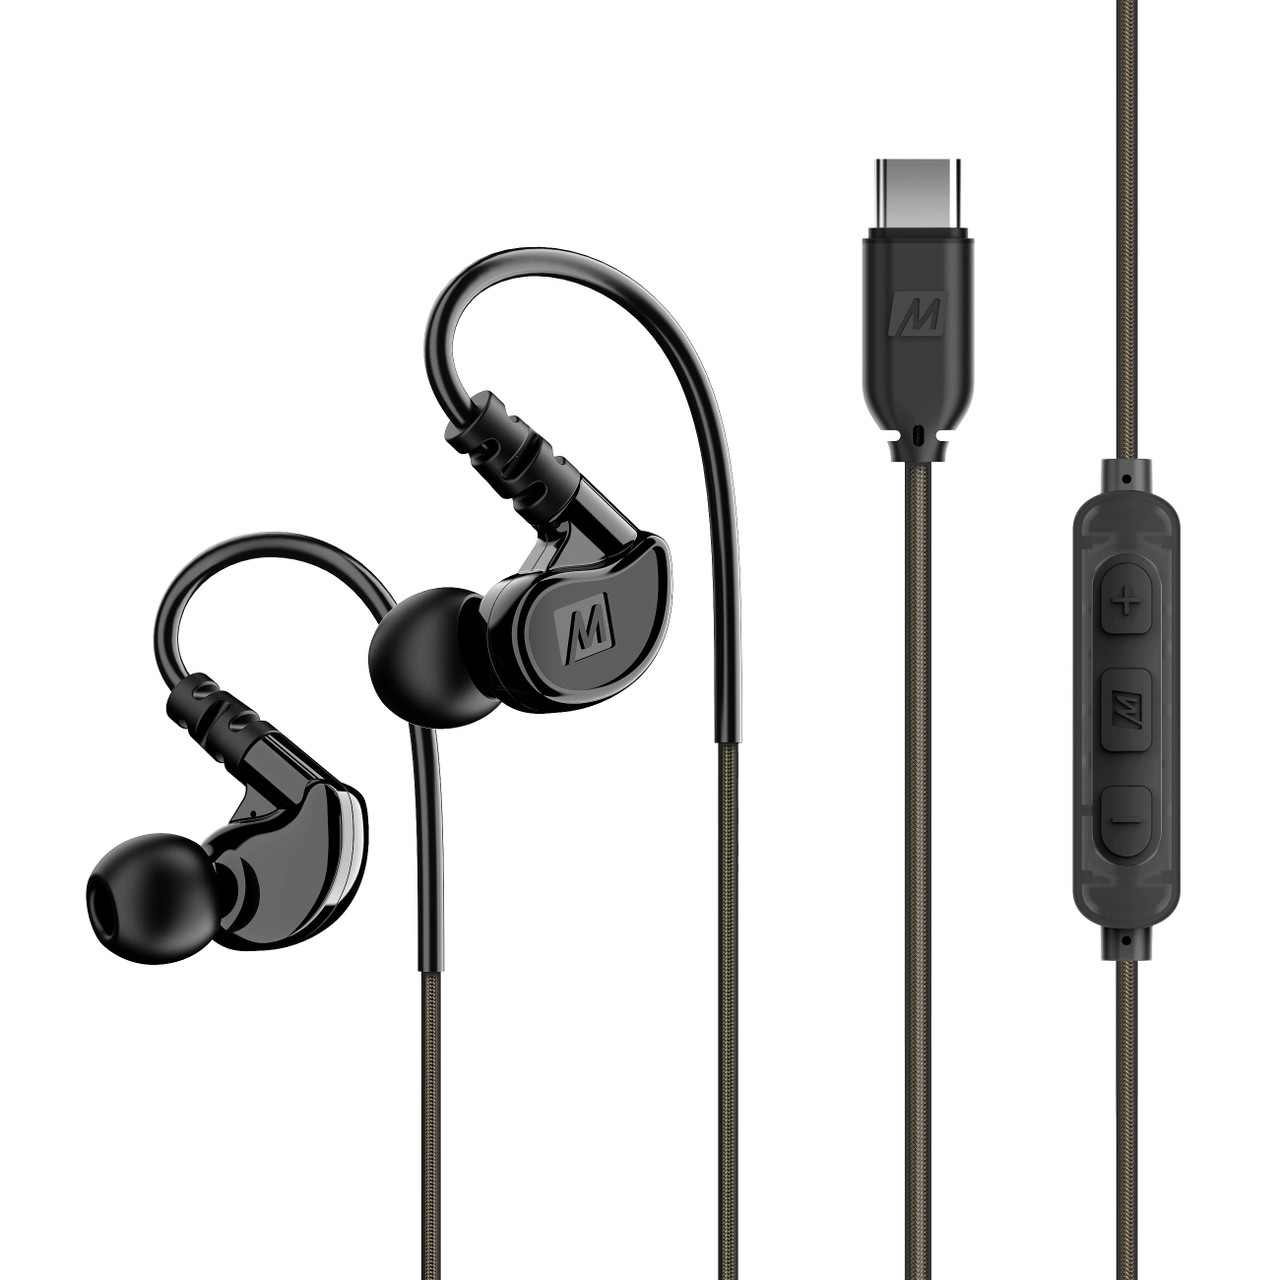 MEE audio M6 Sport USB-C Wired Earbuds with Memory Earhooks, USB Type C, Microphone, and 3-Button Remote